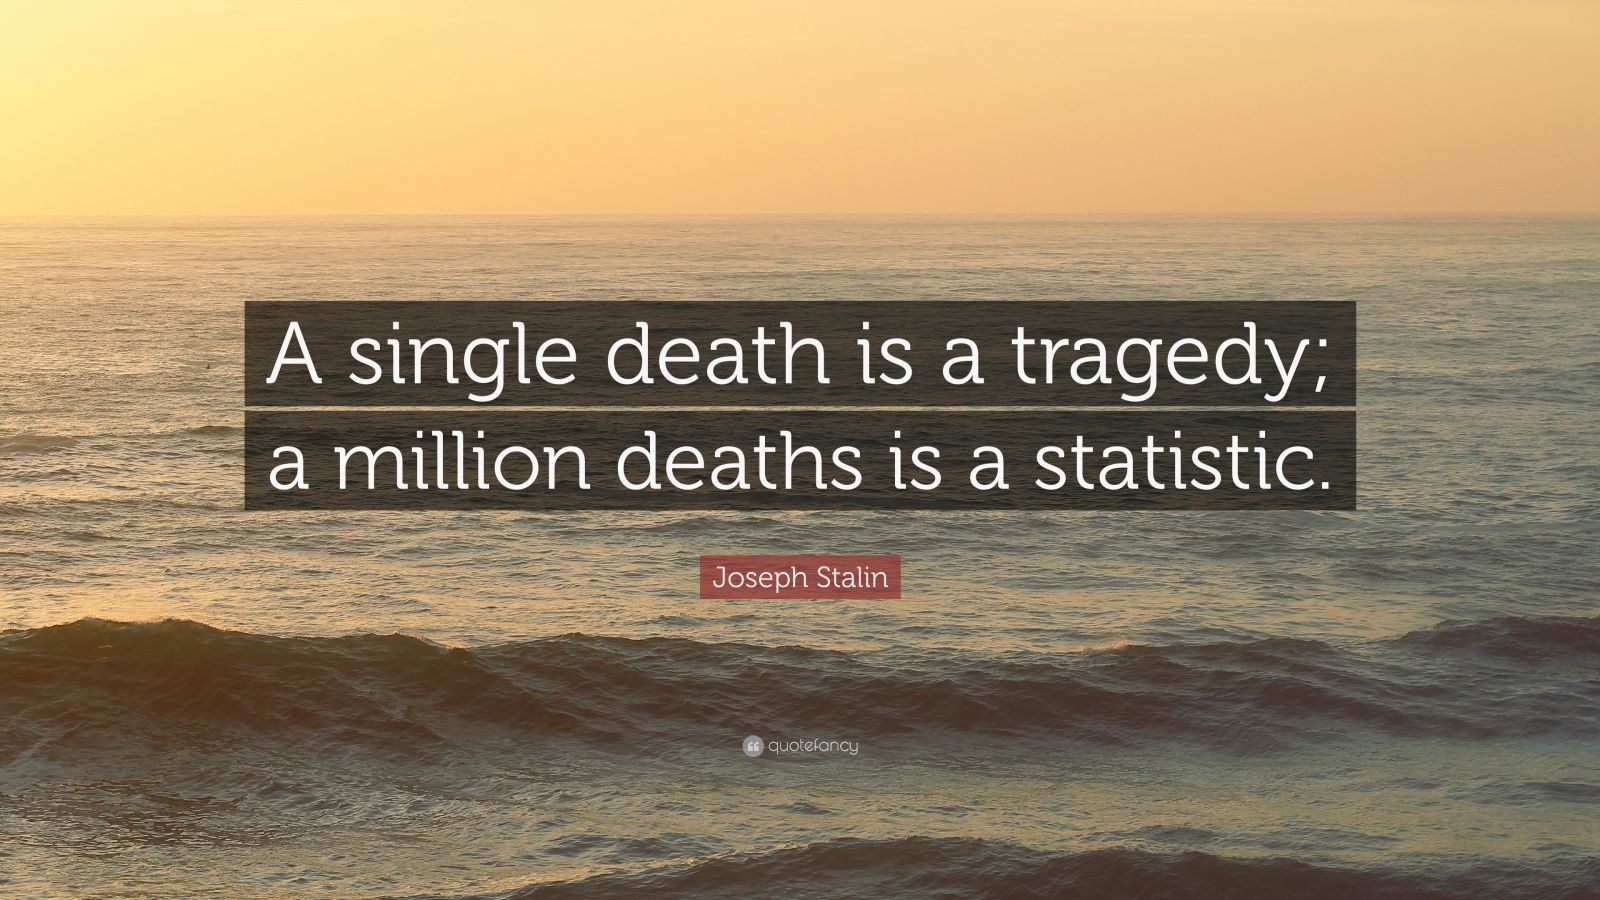 Joseph Stalin Quote: “A single death is a tragedy; a million deaths is